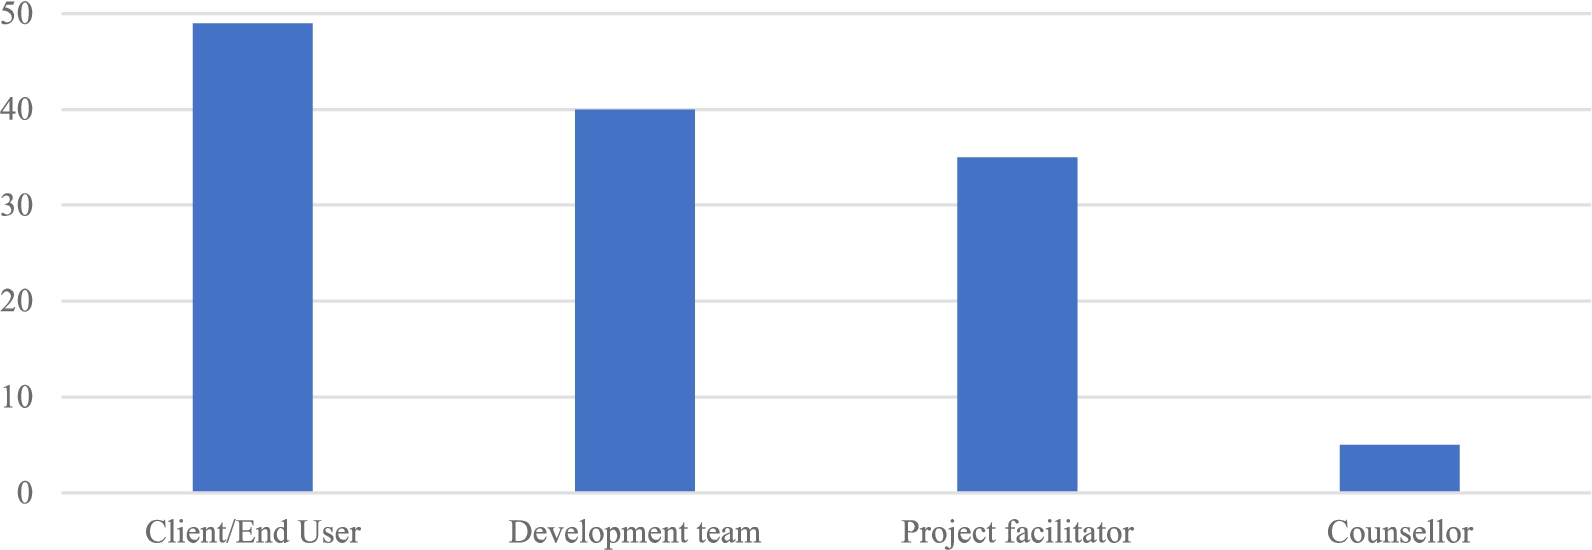 Importance of the roles of the project team members (maximum 56, minimum 0).